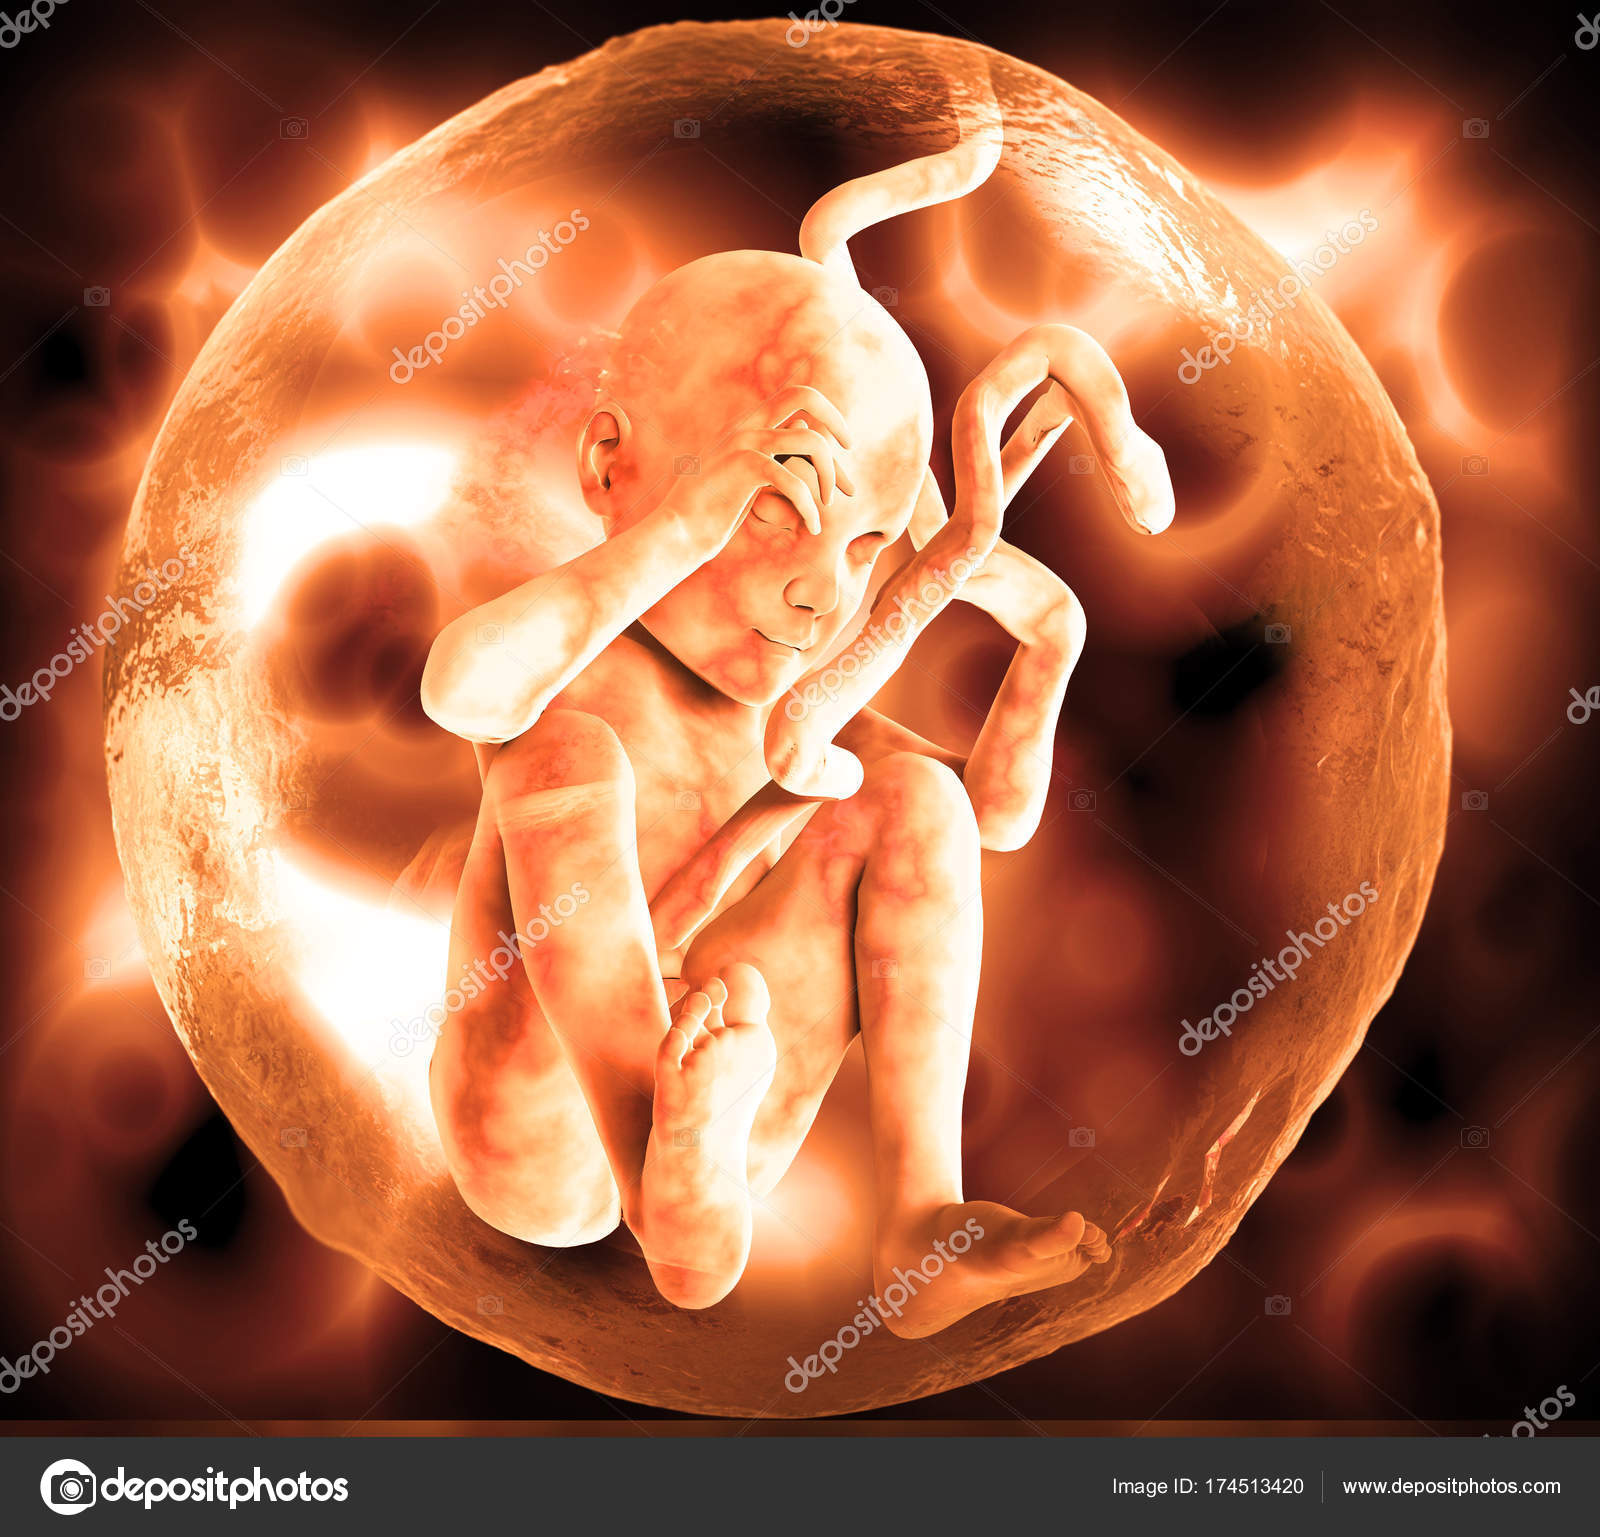 Human Fetus And Dna Medical Concept Graphic And Scientific Stock Photo